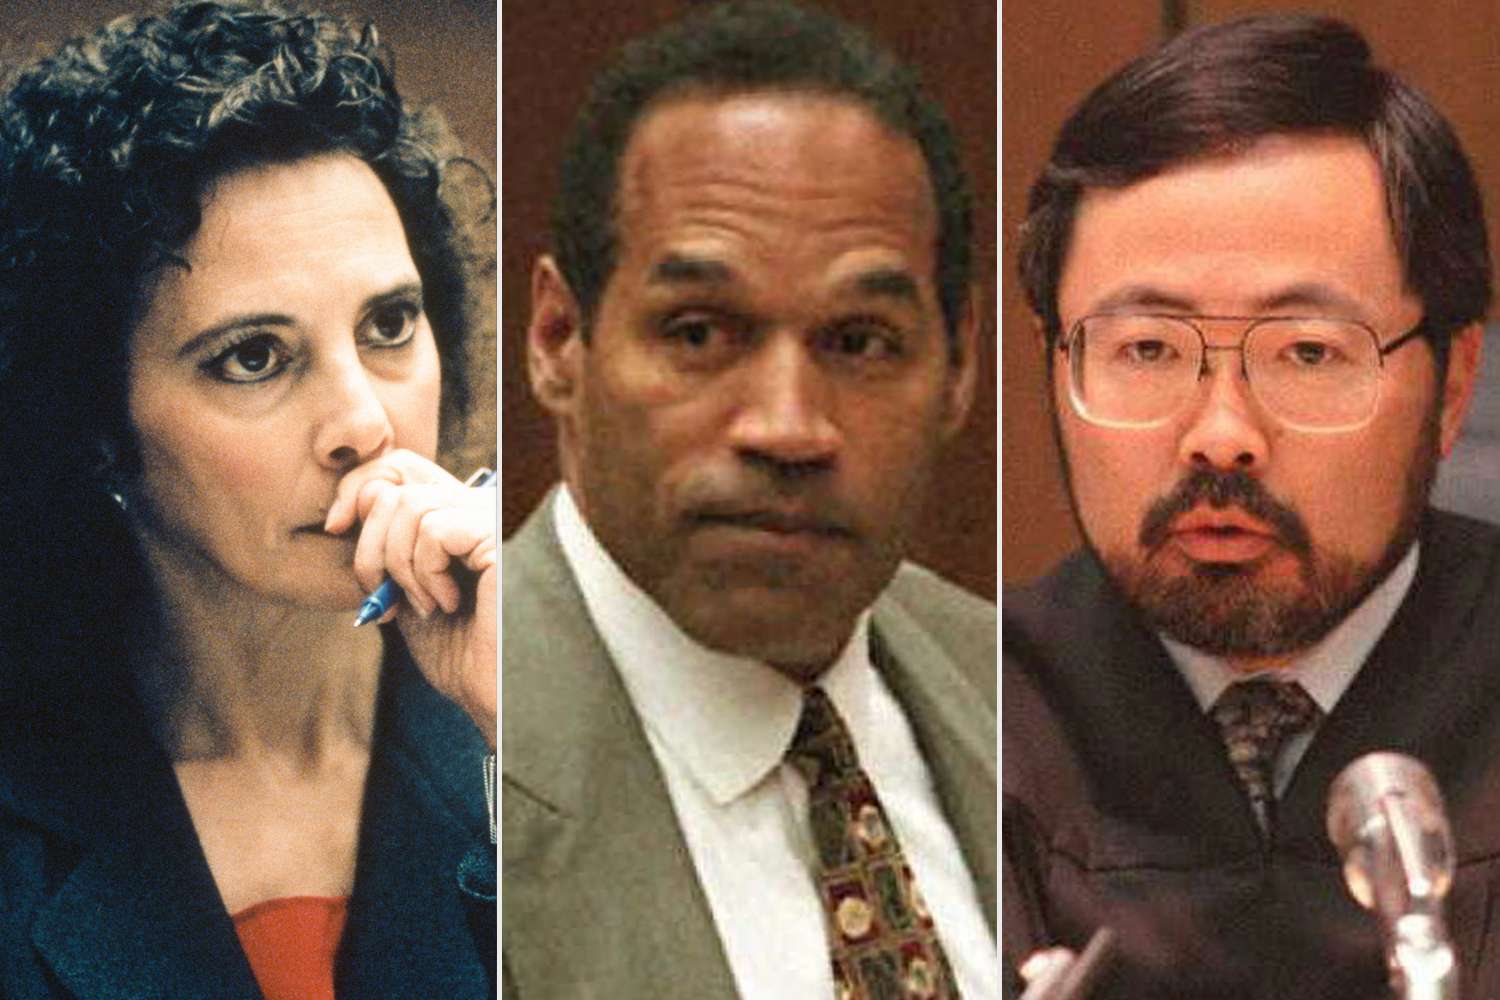 The O.J. Simpson Trial: Where Are They Now? [Video]